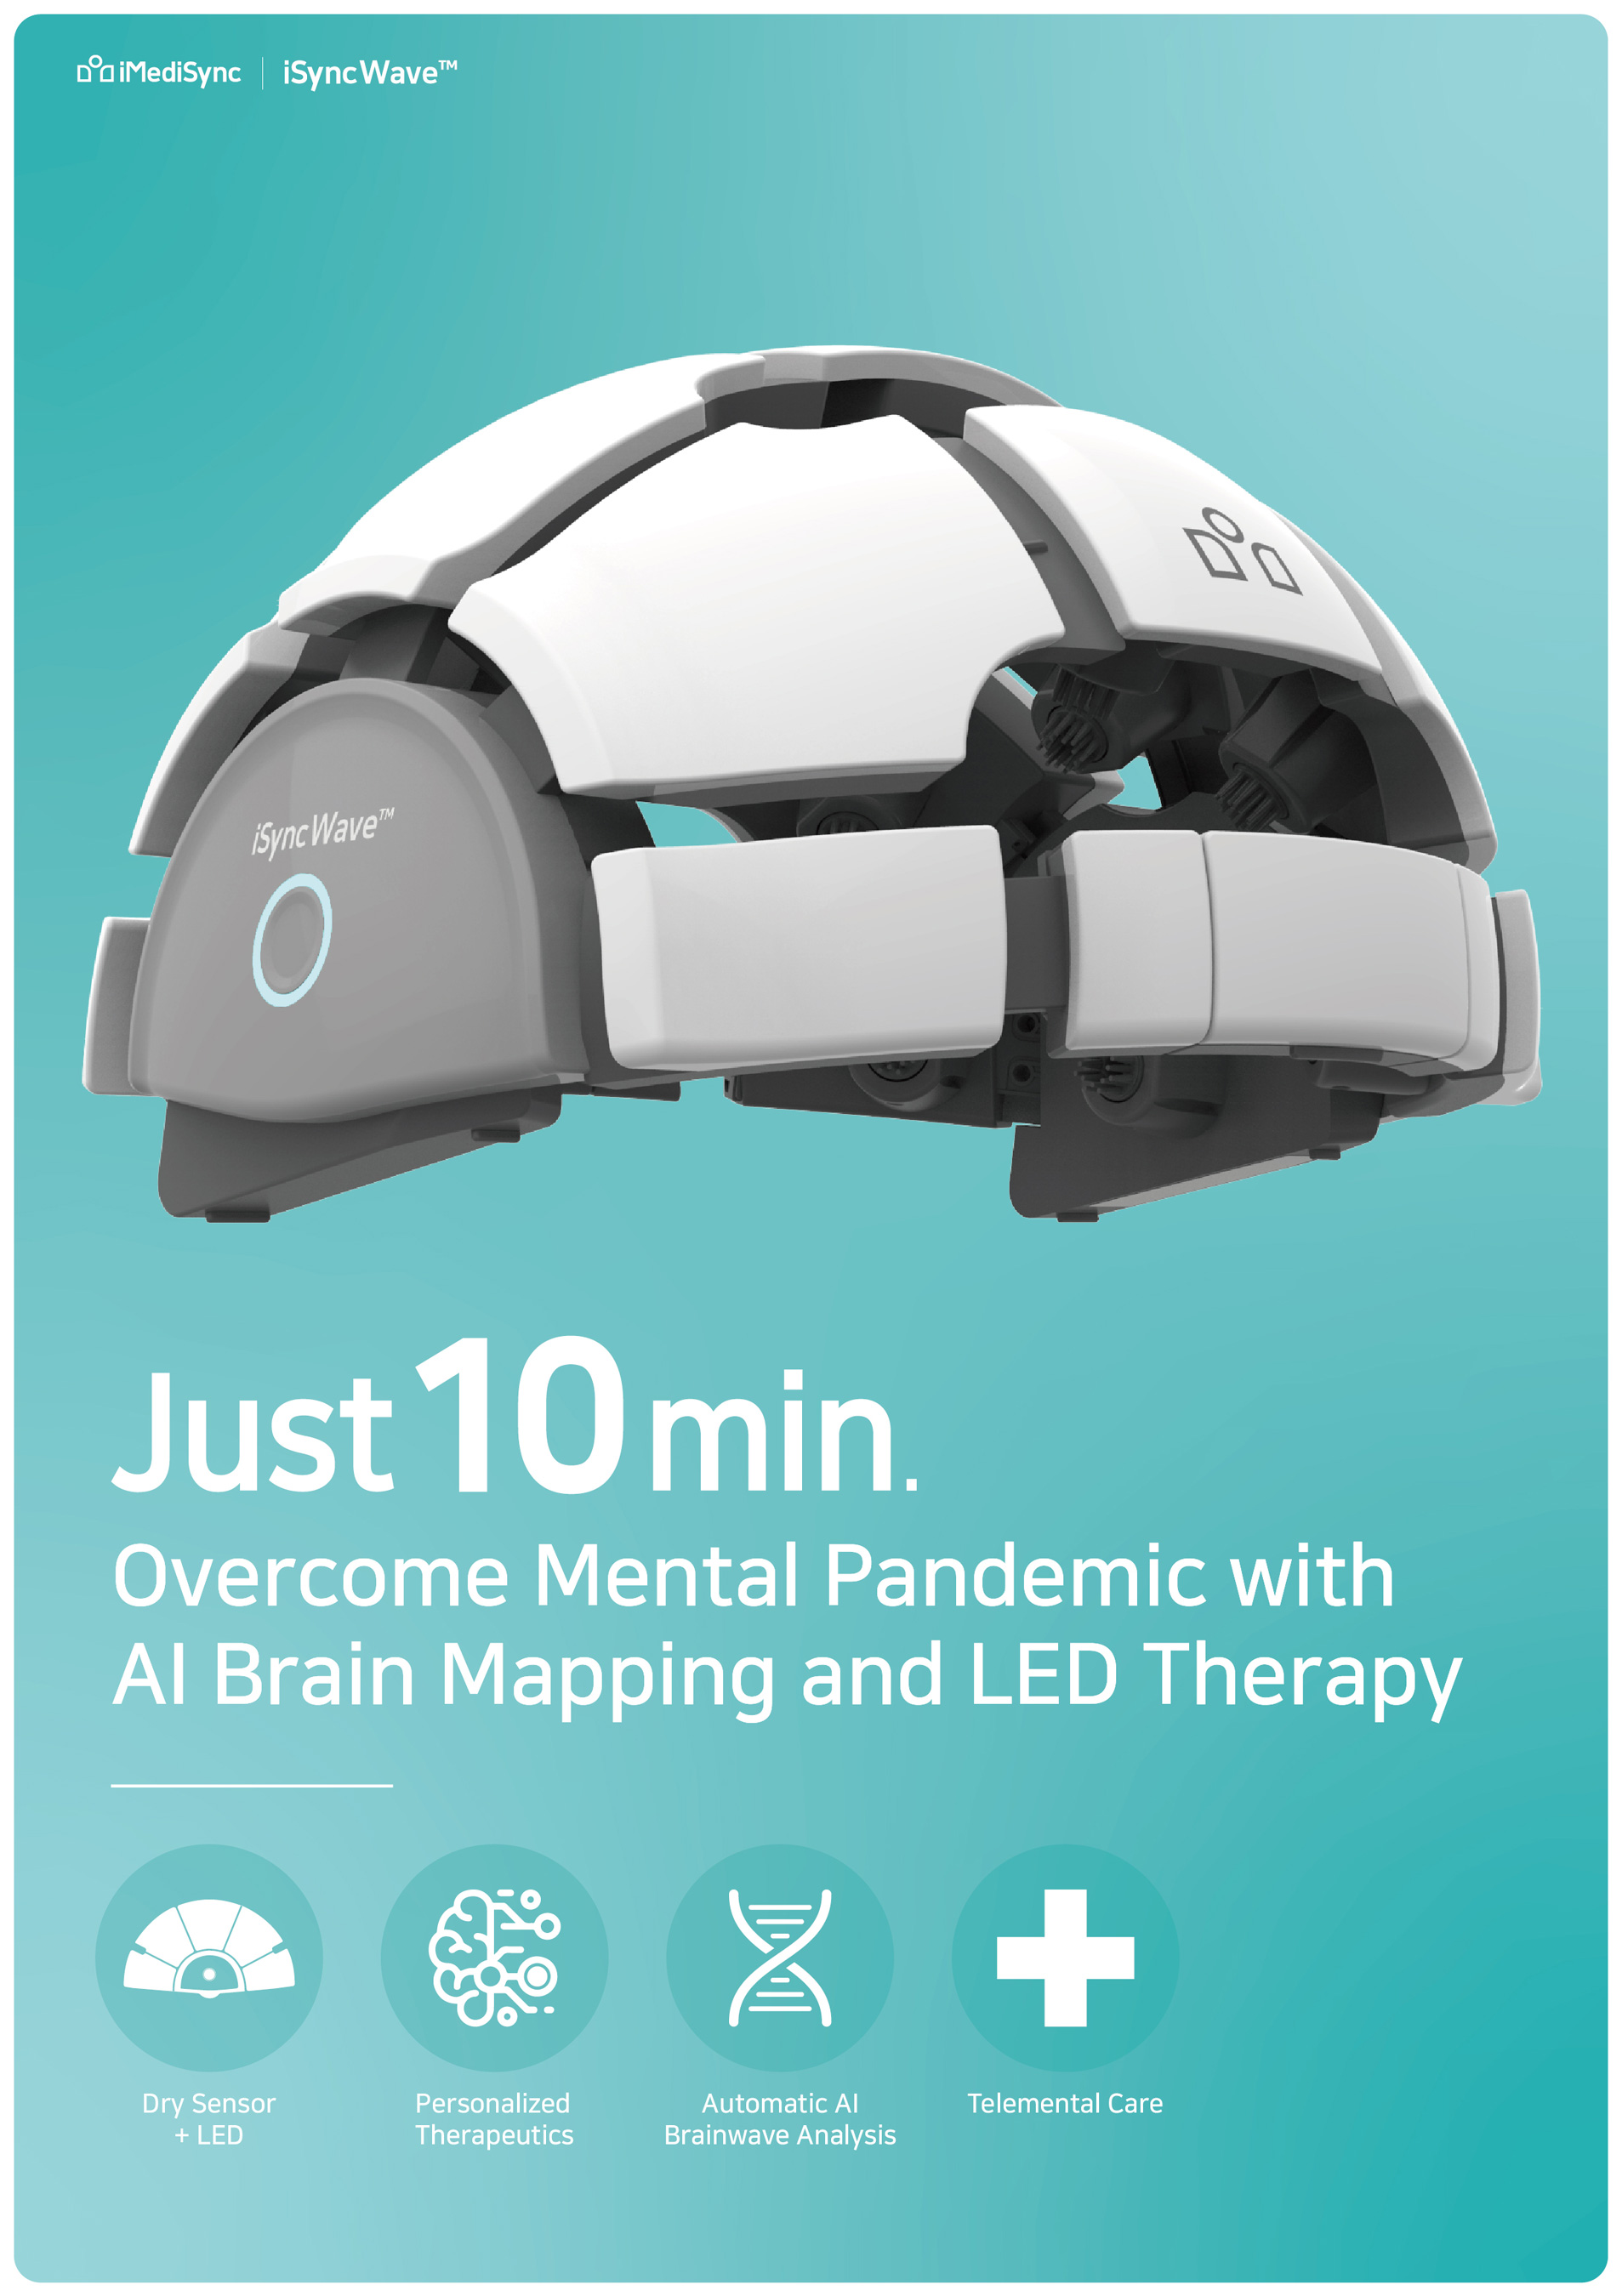 MediSync reveals their first wireless EEG Scanner iSyncWave, an 3D Scanning & Enhancing device to analyze and get results in just 10 min